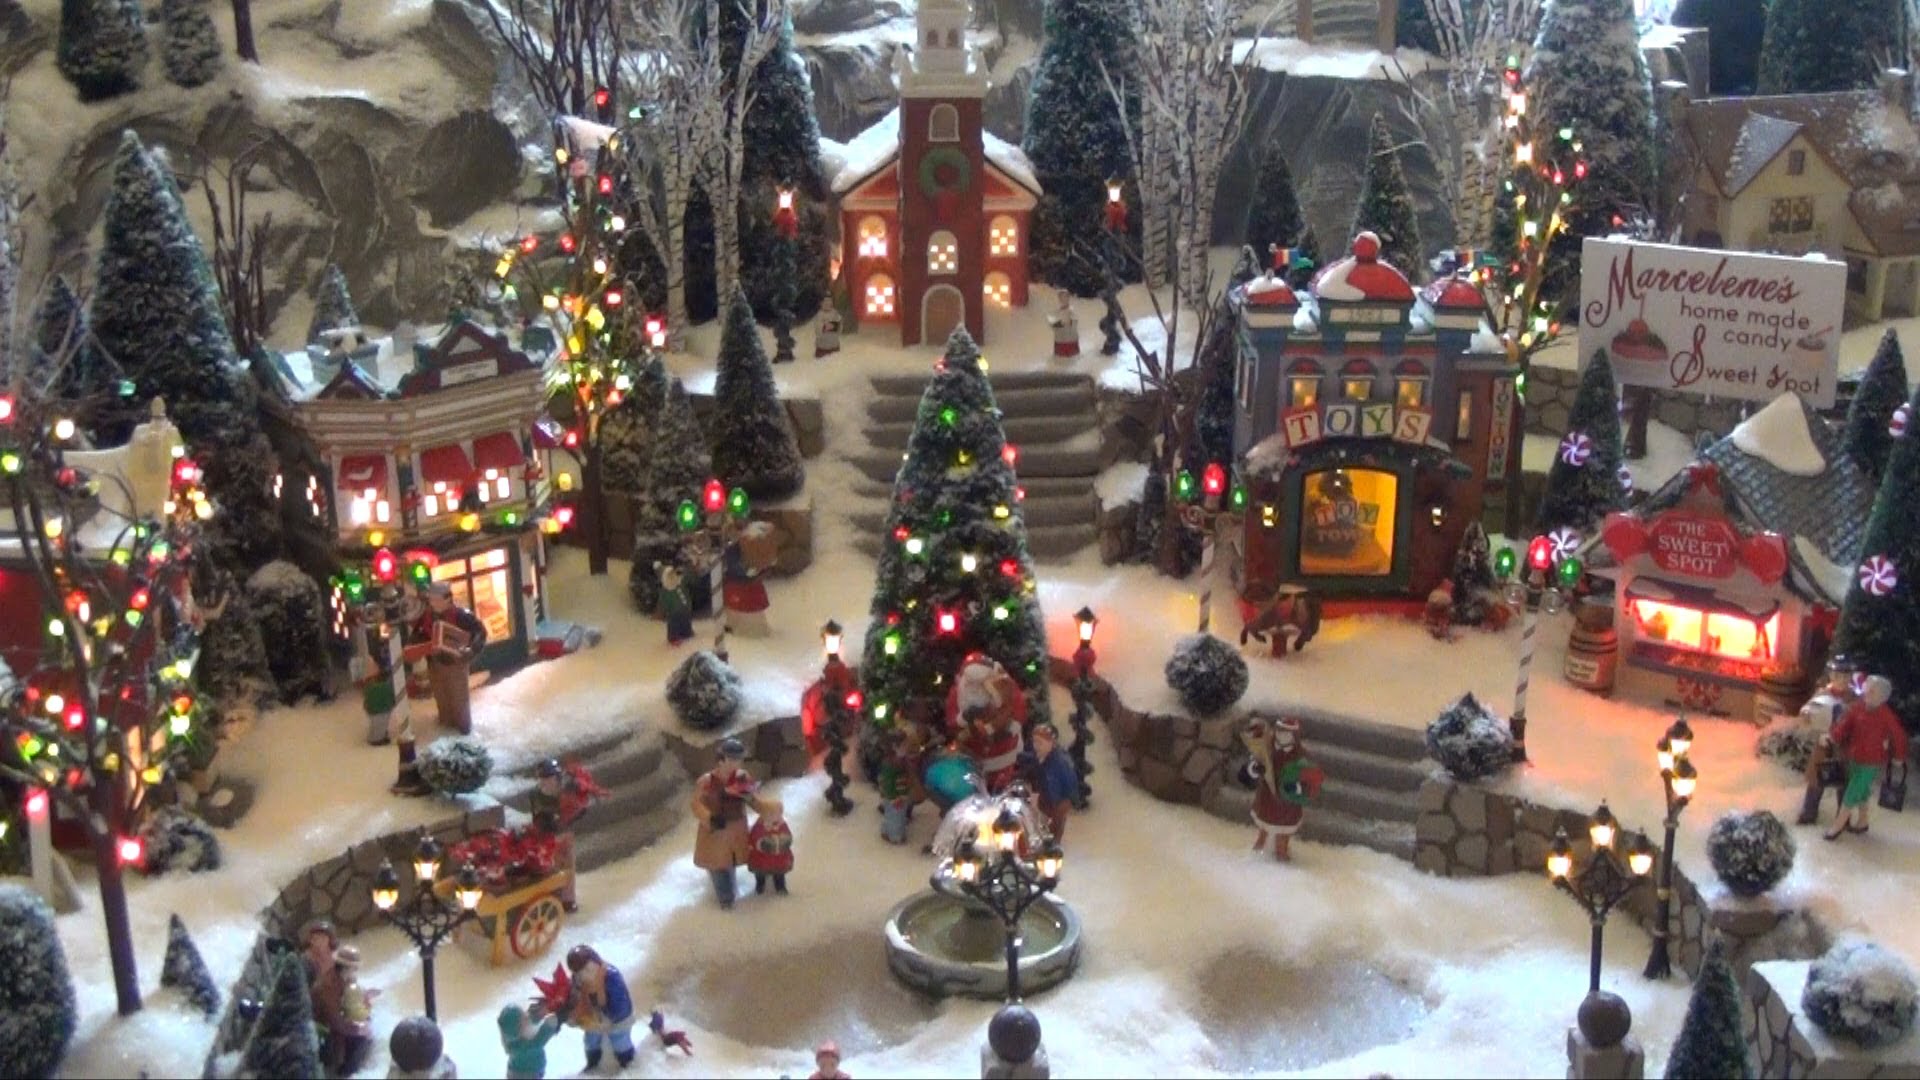 Ideas For Christmas Village Displays - HD Wallpaper 